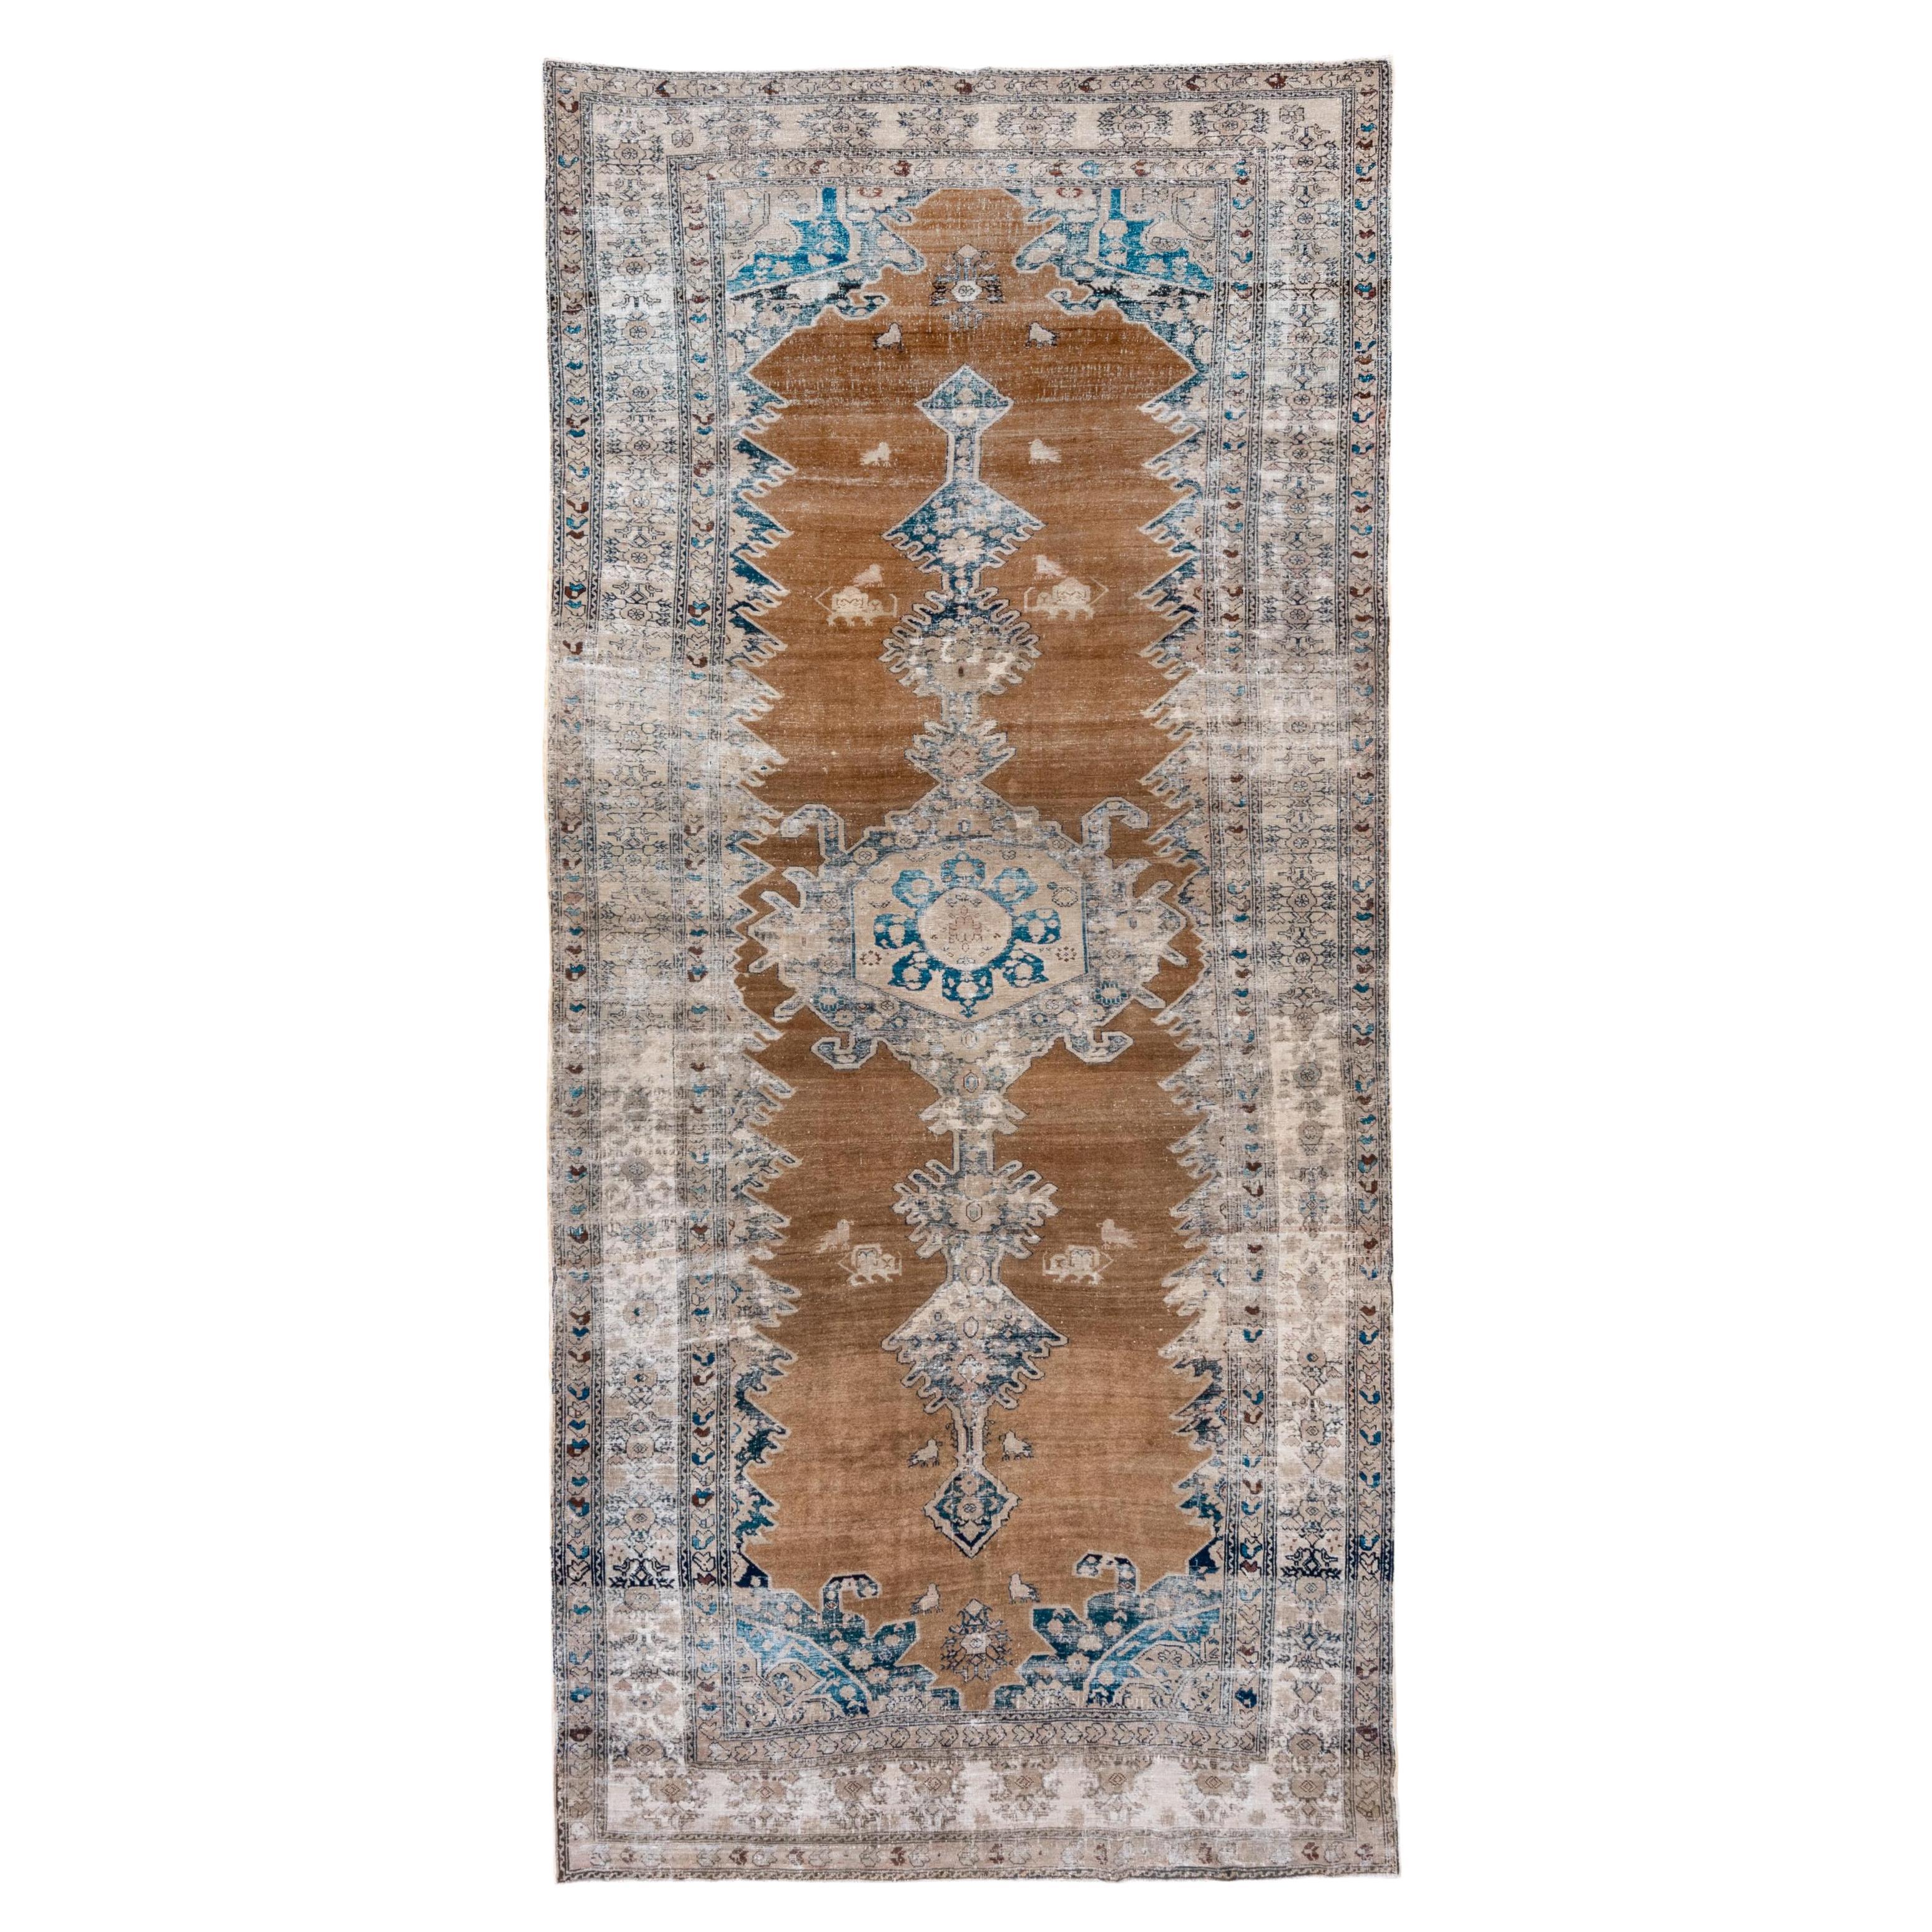 Stunning Antique Persian Farahan Gallery Rug, Light Brown Field, Ivory Borders For Sale